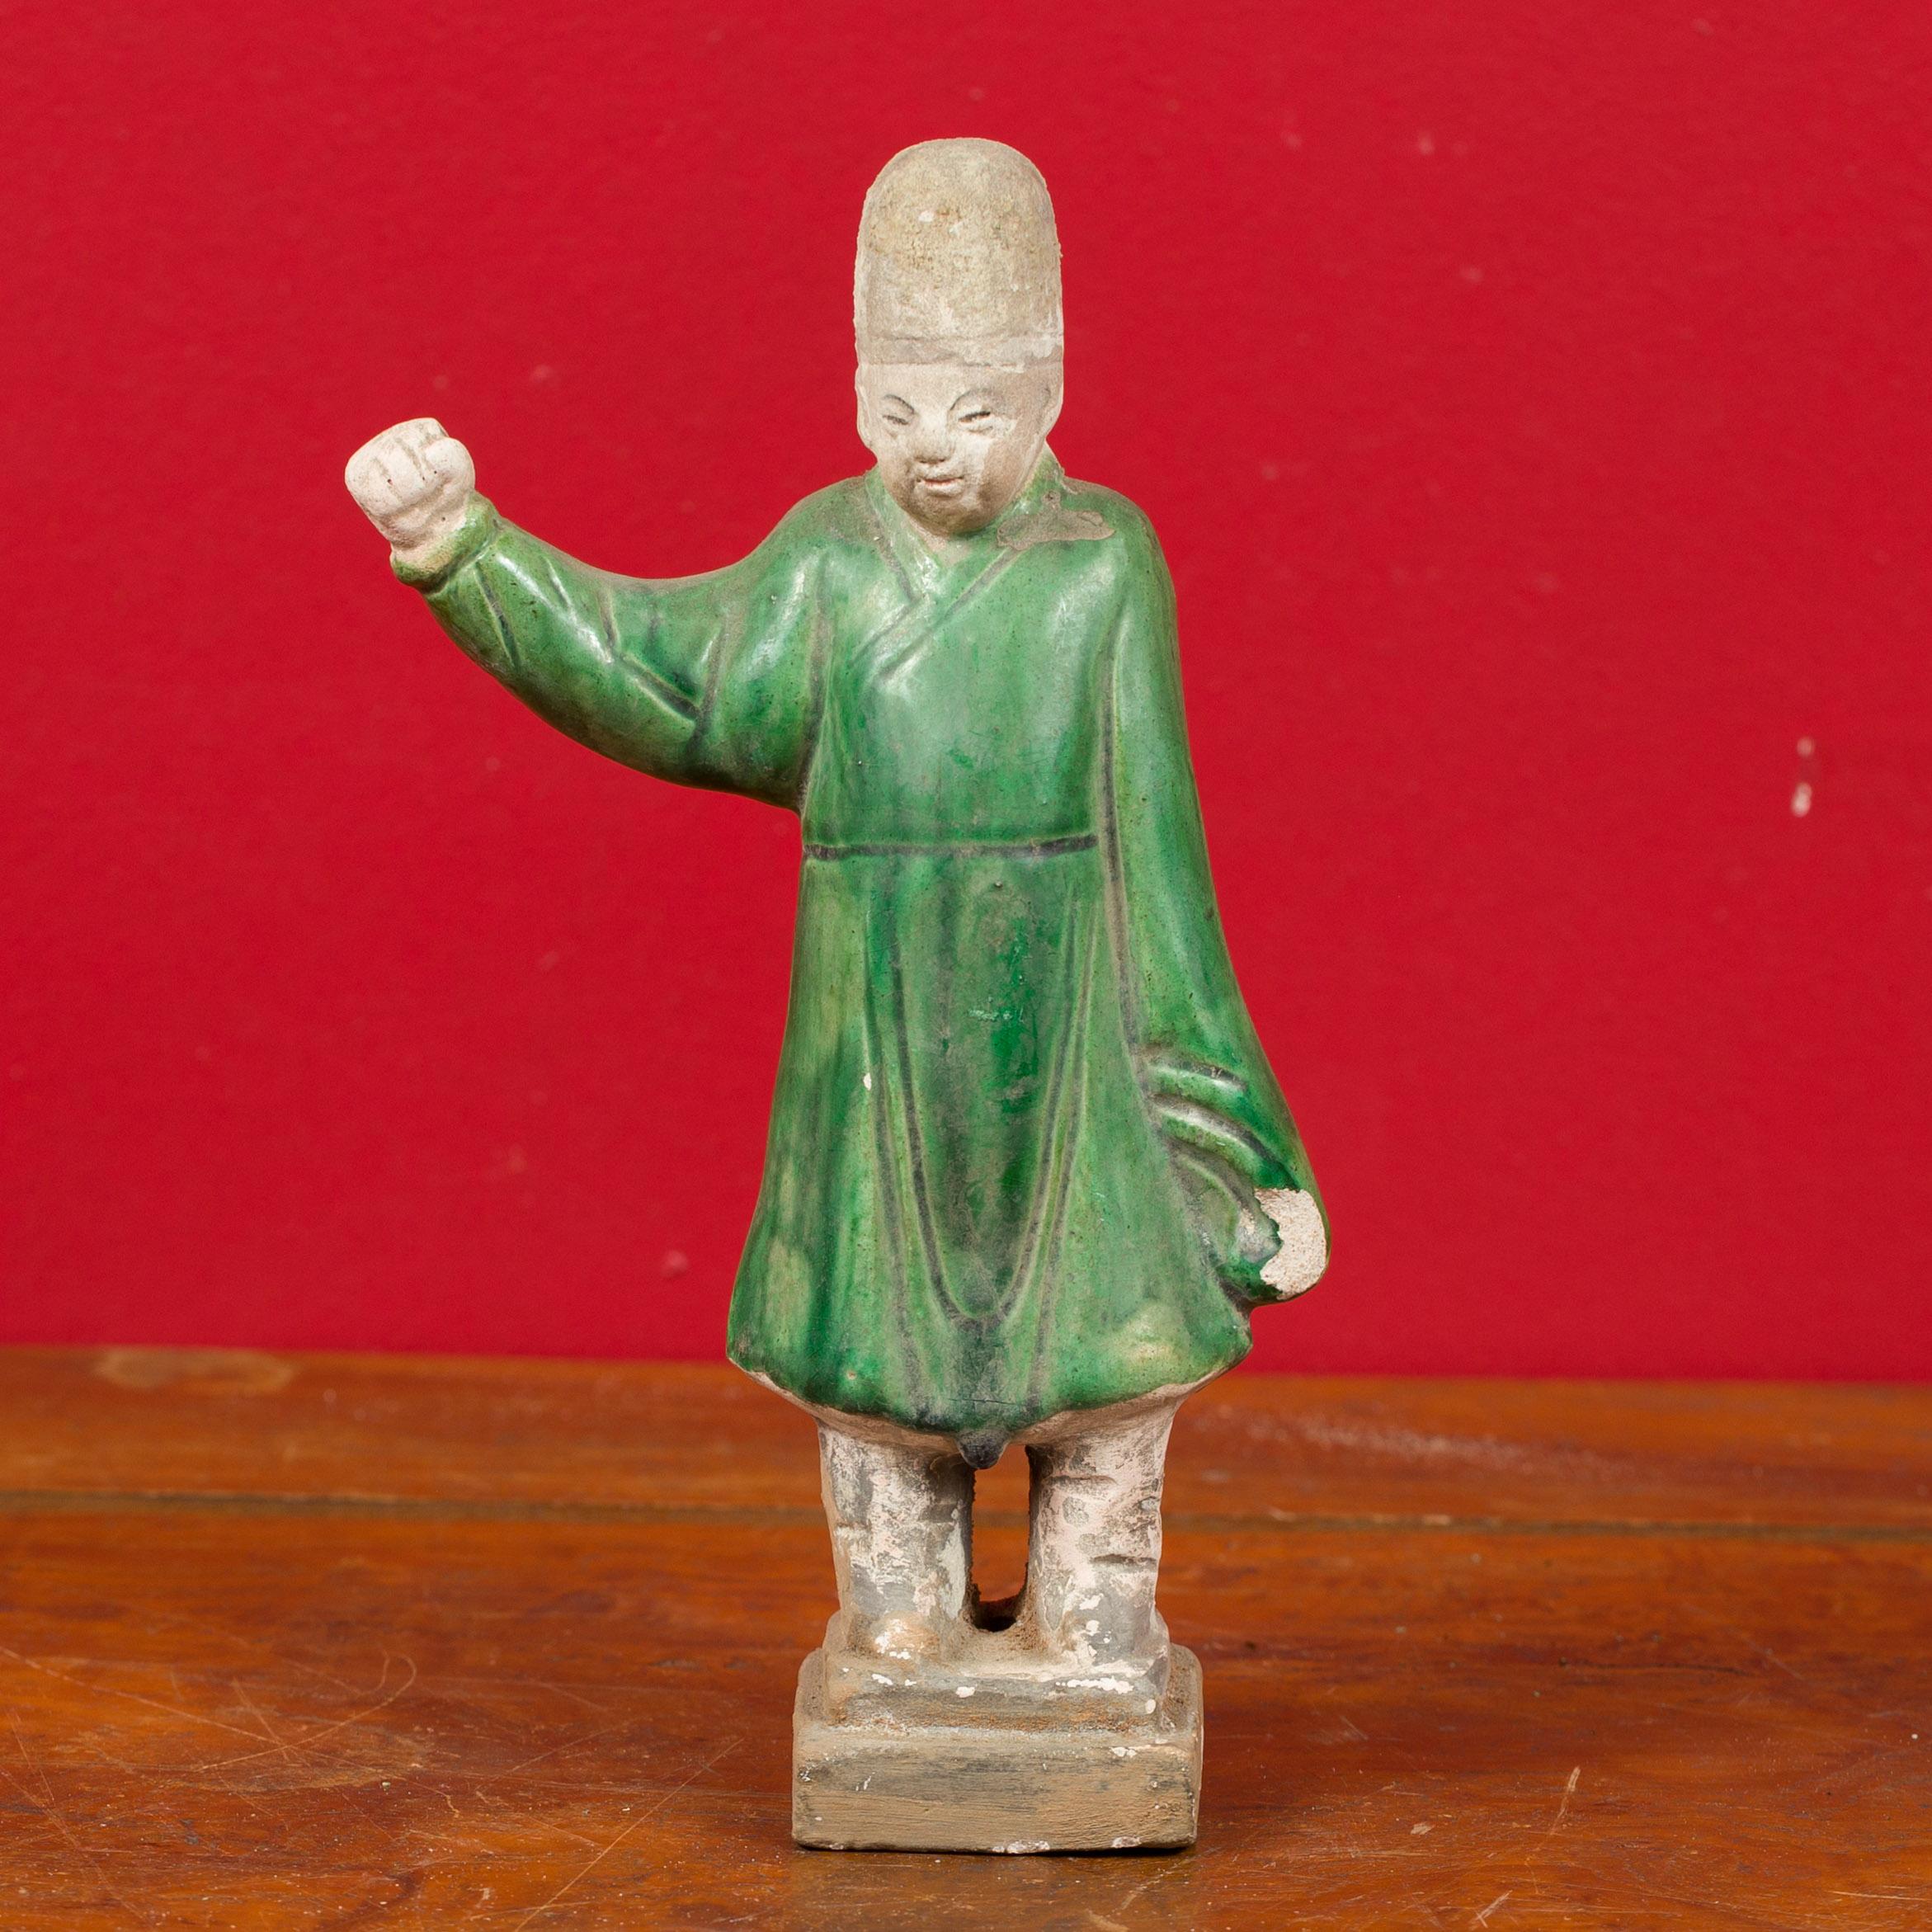 A petite Chinese Ming Dynasty green glazed terracotta court official figurine from the 15th or 16th century, with original polychromy. Attracting our eye with its nice polychromy, this Ming statuette features a court official standing proudly on a